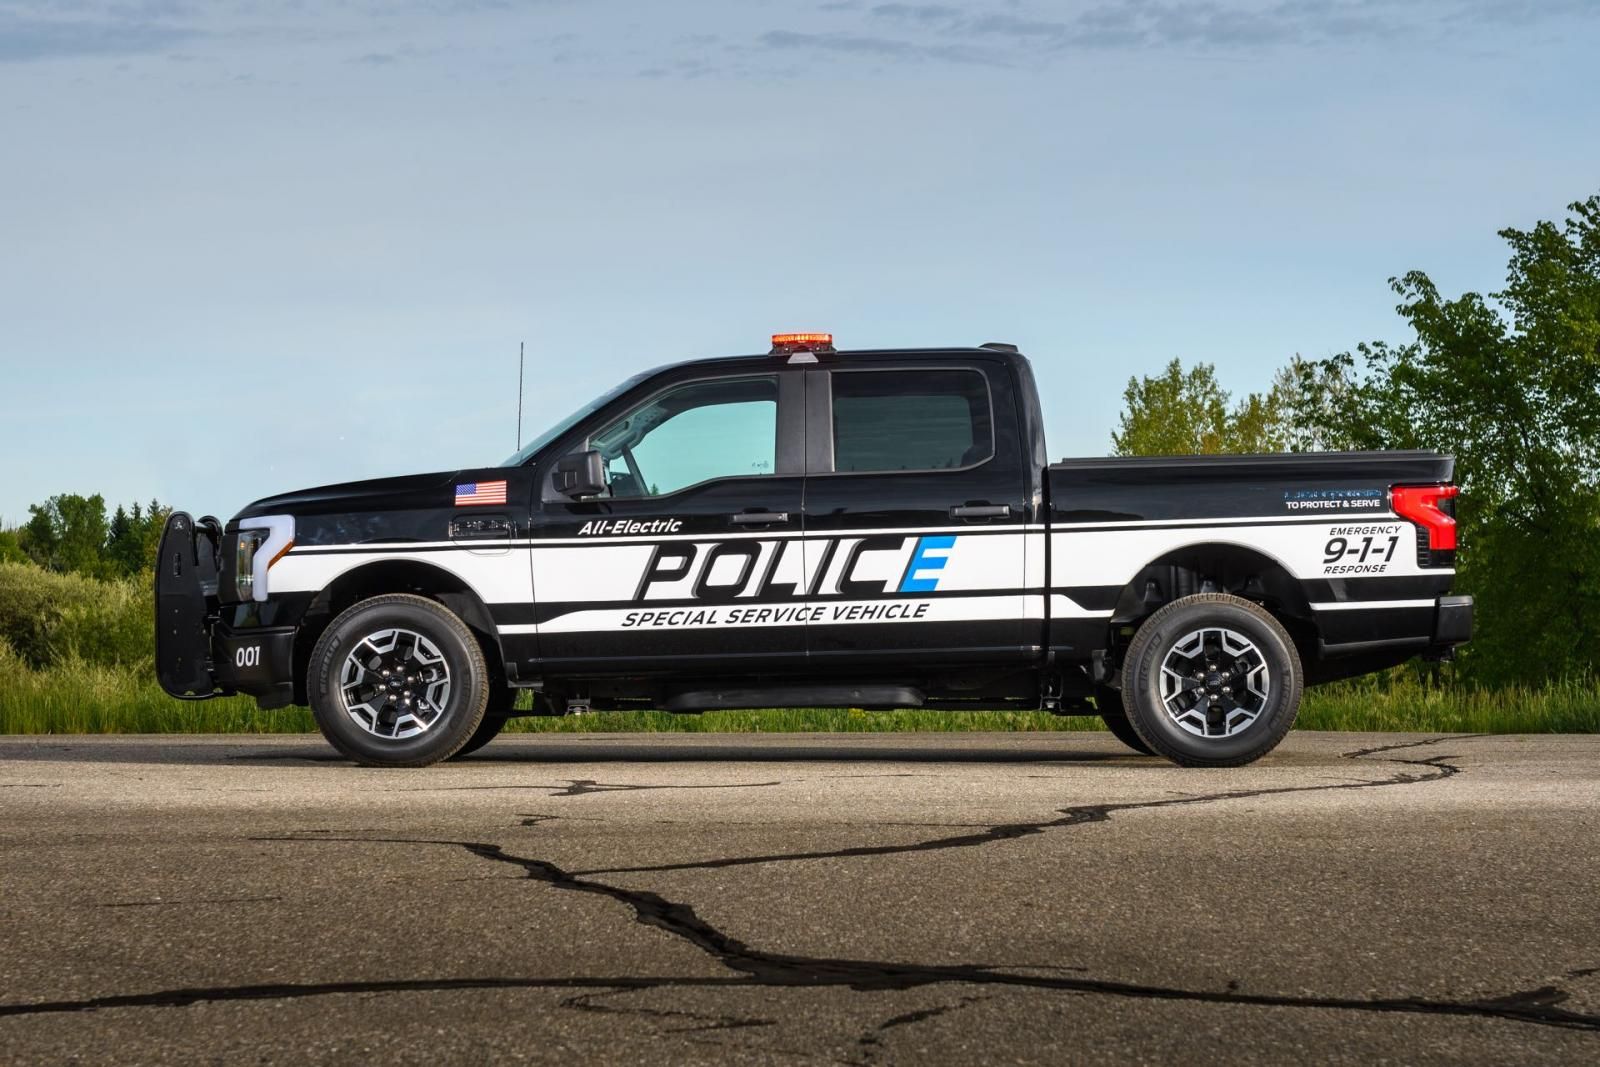 Ford F-150 Lightning Pro Special Service Vehicle Police electric